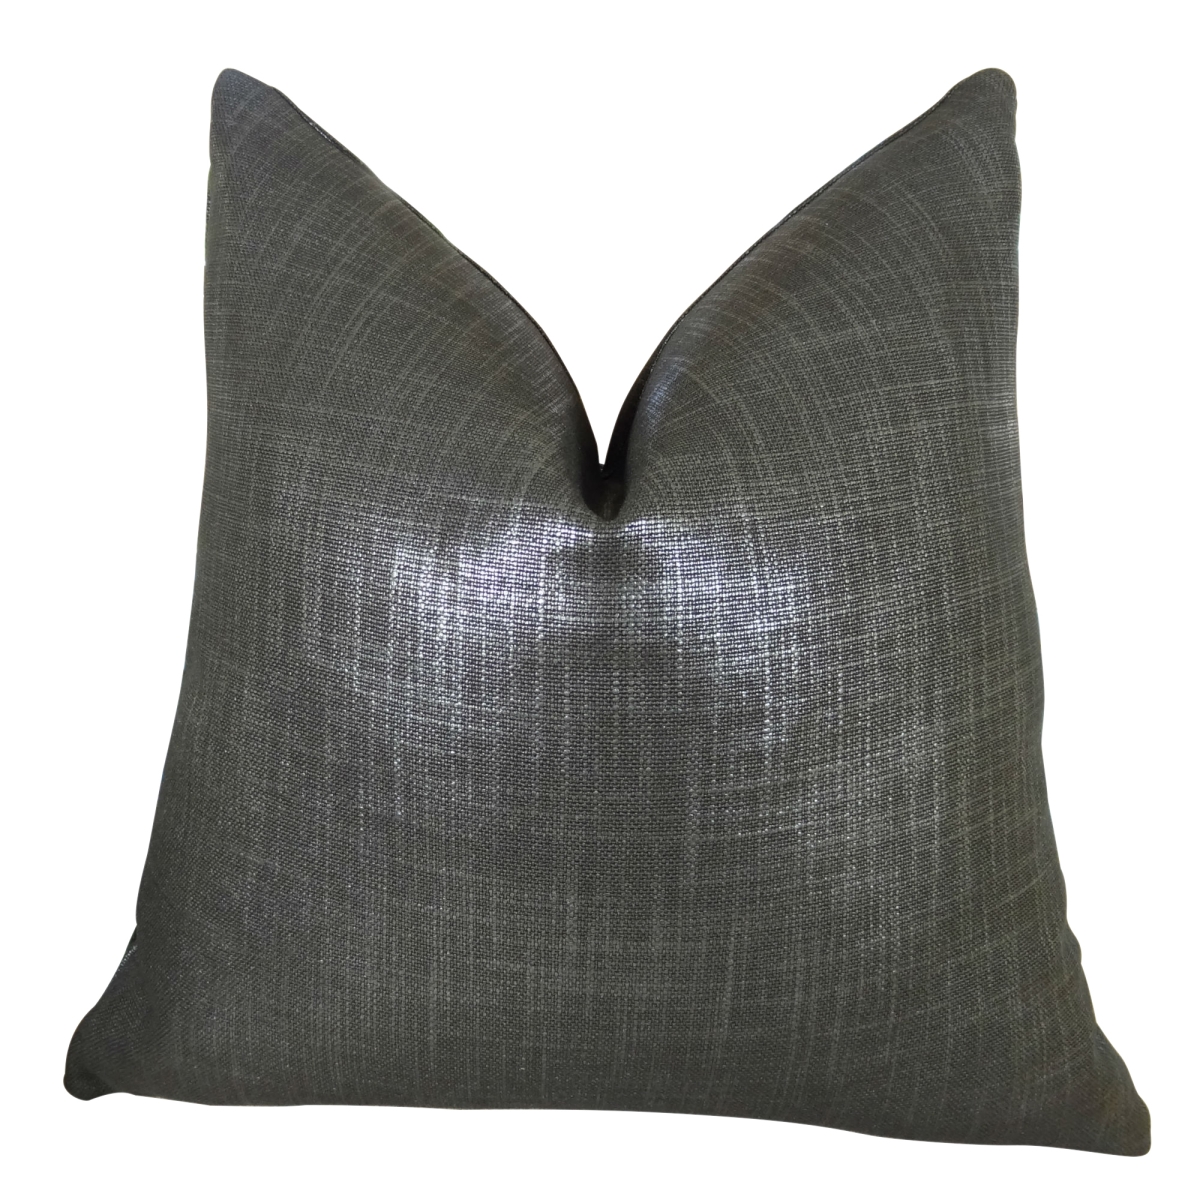 Plutus PB11374-2030-DP 20 x 30 in. Double Sided Queen Size Glazed Linen Indigo Handmade Double Sided Throw Pillow - Metallic Gray